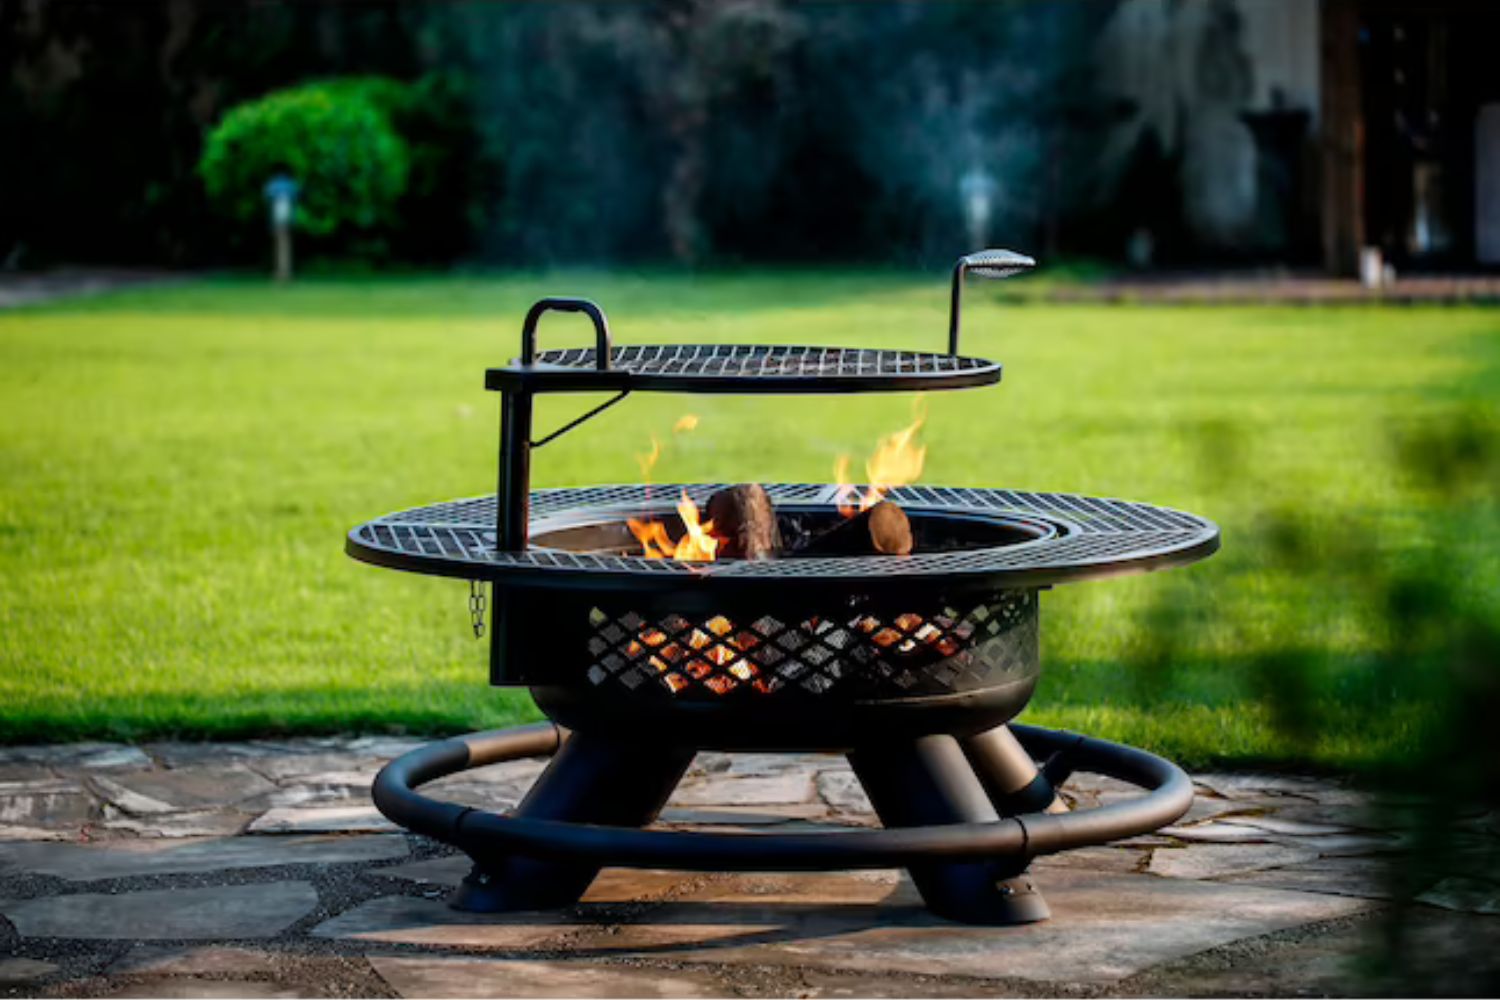 The Best Outdoor Accessories to Shop from Lowe’s Options: Big Horn Black Steel Wood-Burning Fire Pit